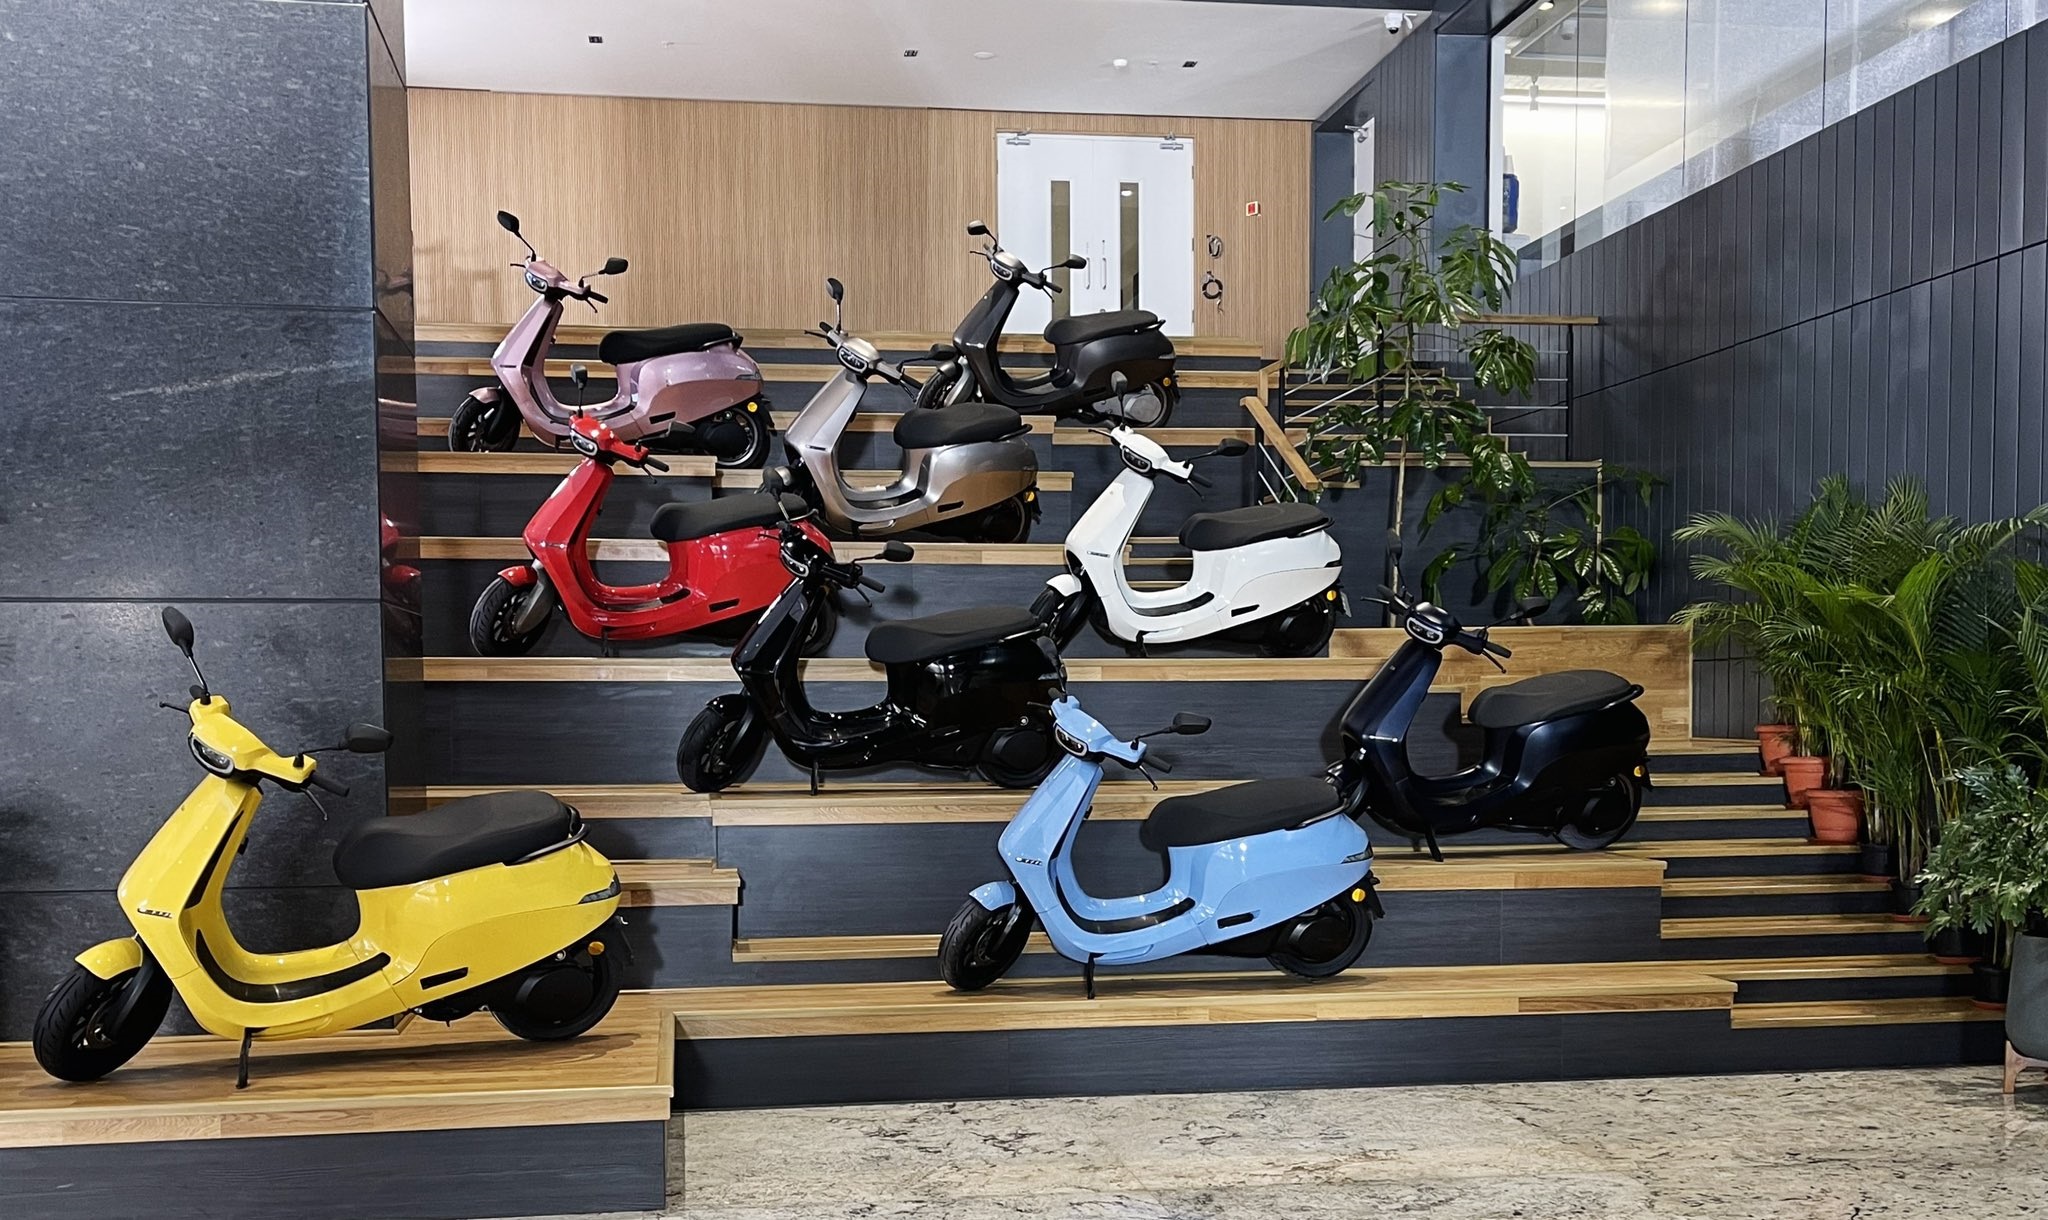 Ola E-scooters in deferent colors